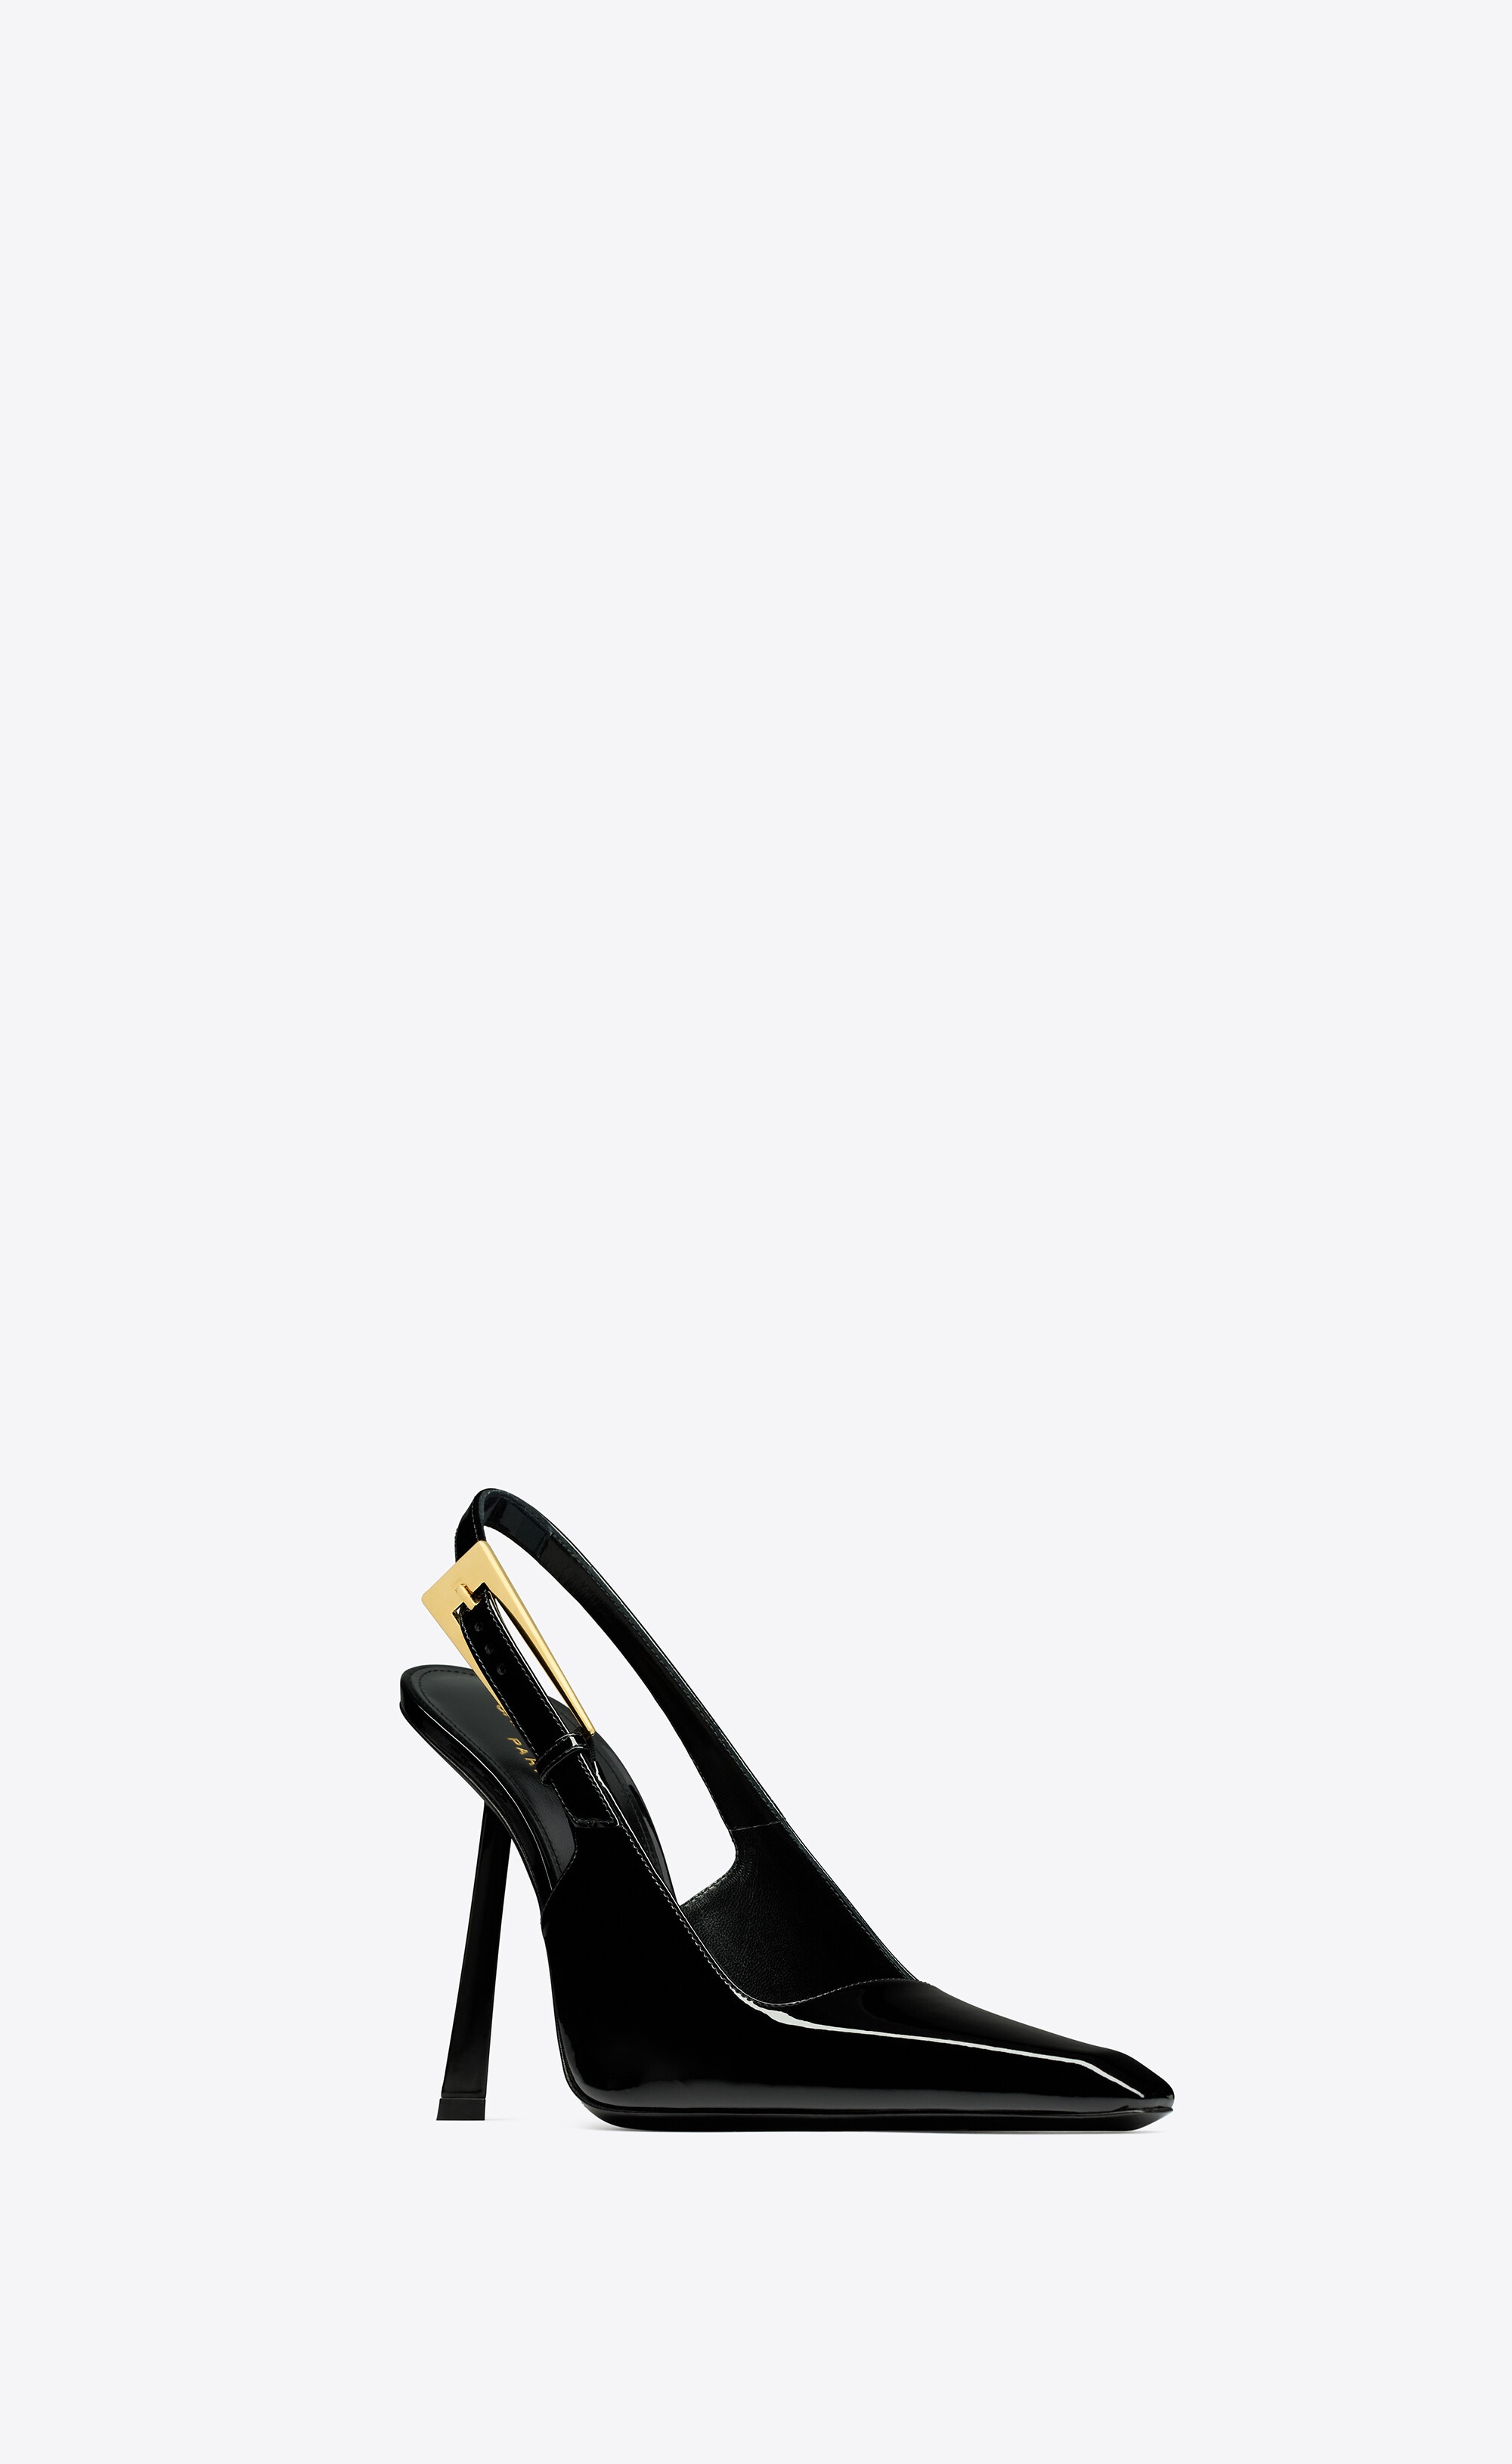 lee slingback pumps in patent leather - 3